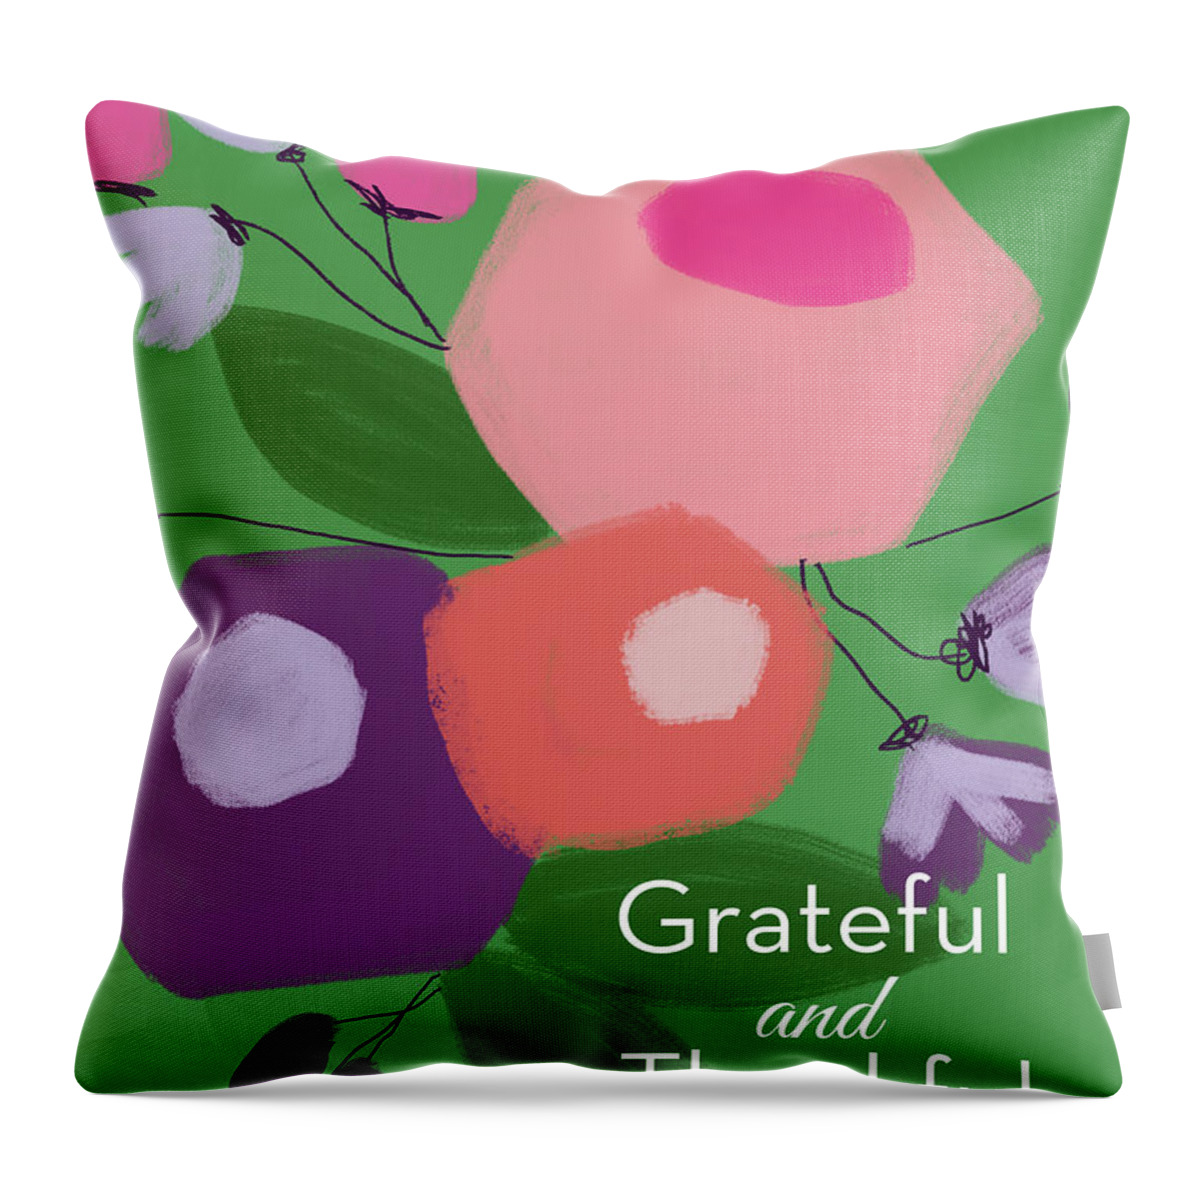 Gratitude Throw Pillow featuring the mixed media Grateful and Thankful Flowers 1- Art by Linda Woods by Linda Woods